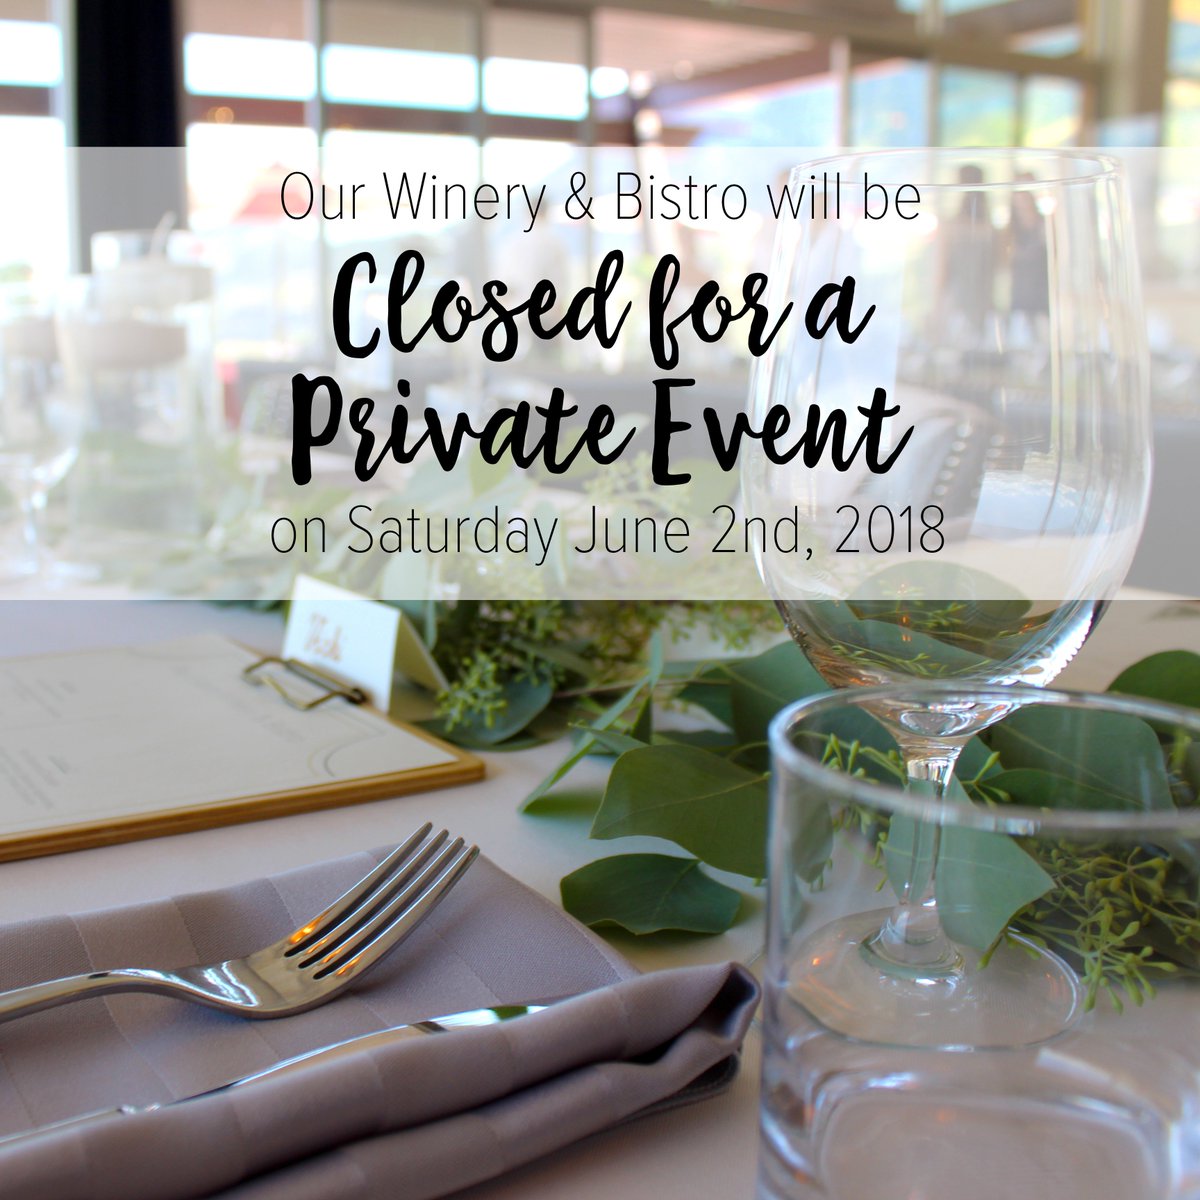 Please note we will be closed tomorrow, Saturday June 2nd for a Private Event. Our Bistro and Tasting Room will resume normal business hours on Sunday.  #privateevent #penticton #wineryevent